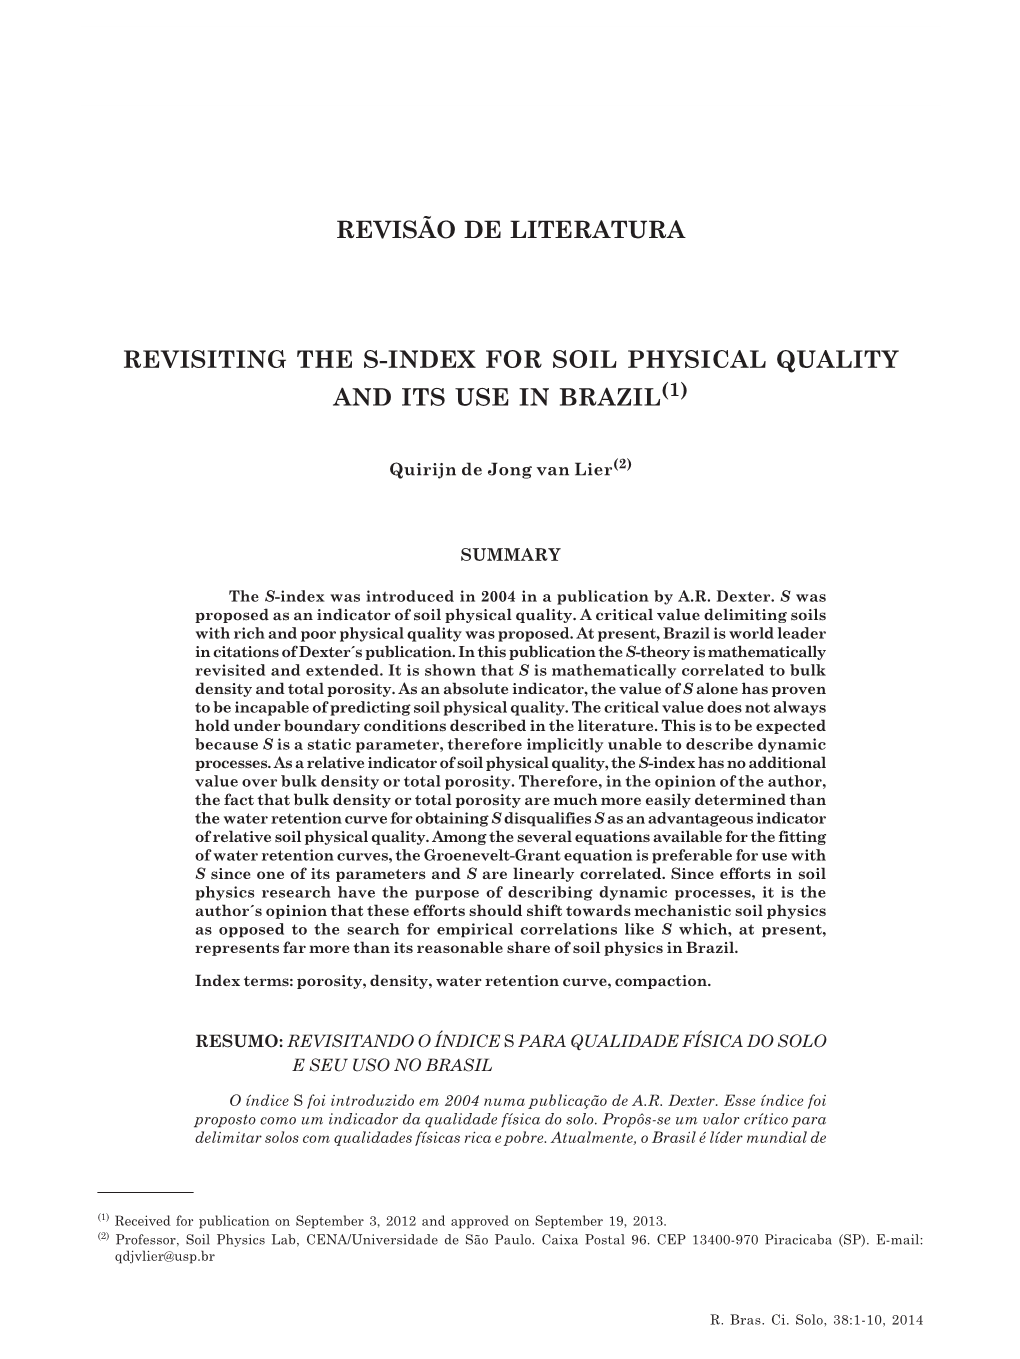 Revisiting the S-Index for Soil Physical Quality and Its Use in Brazil 1